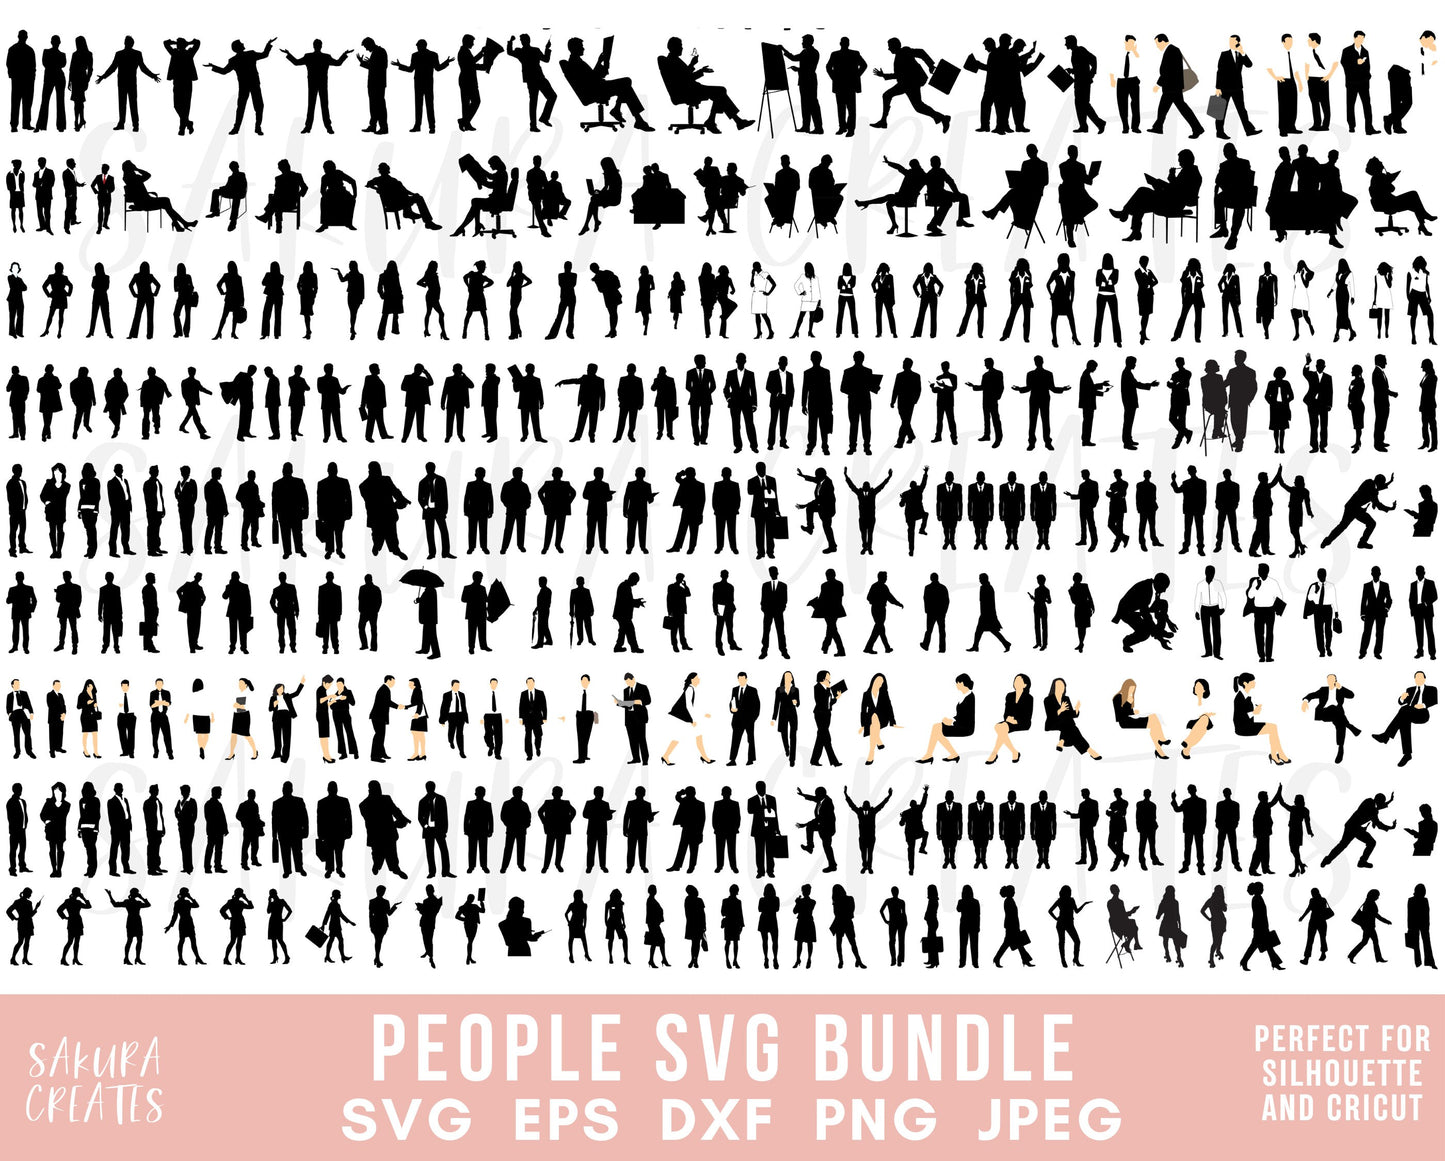 300+ People Silhouette People SVG Business svg Business people Working People Office svg vector people clipart startup architectural cutout